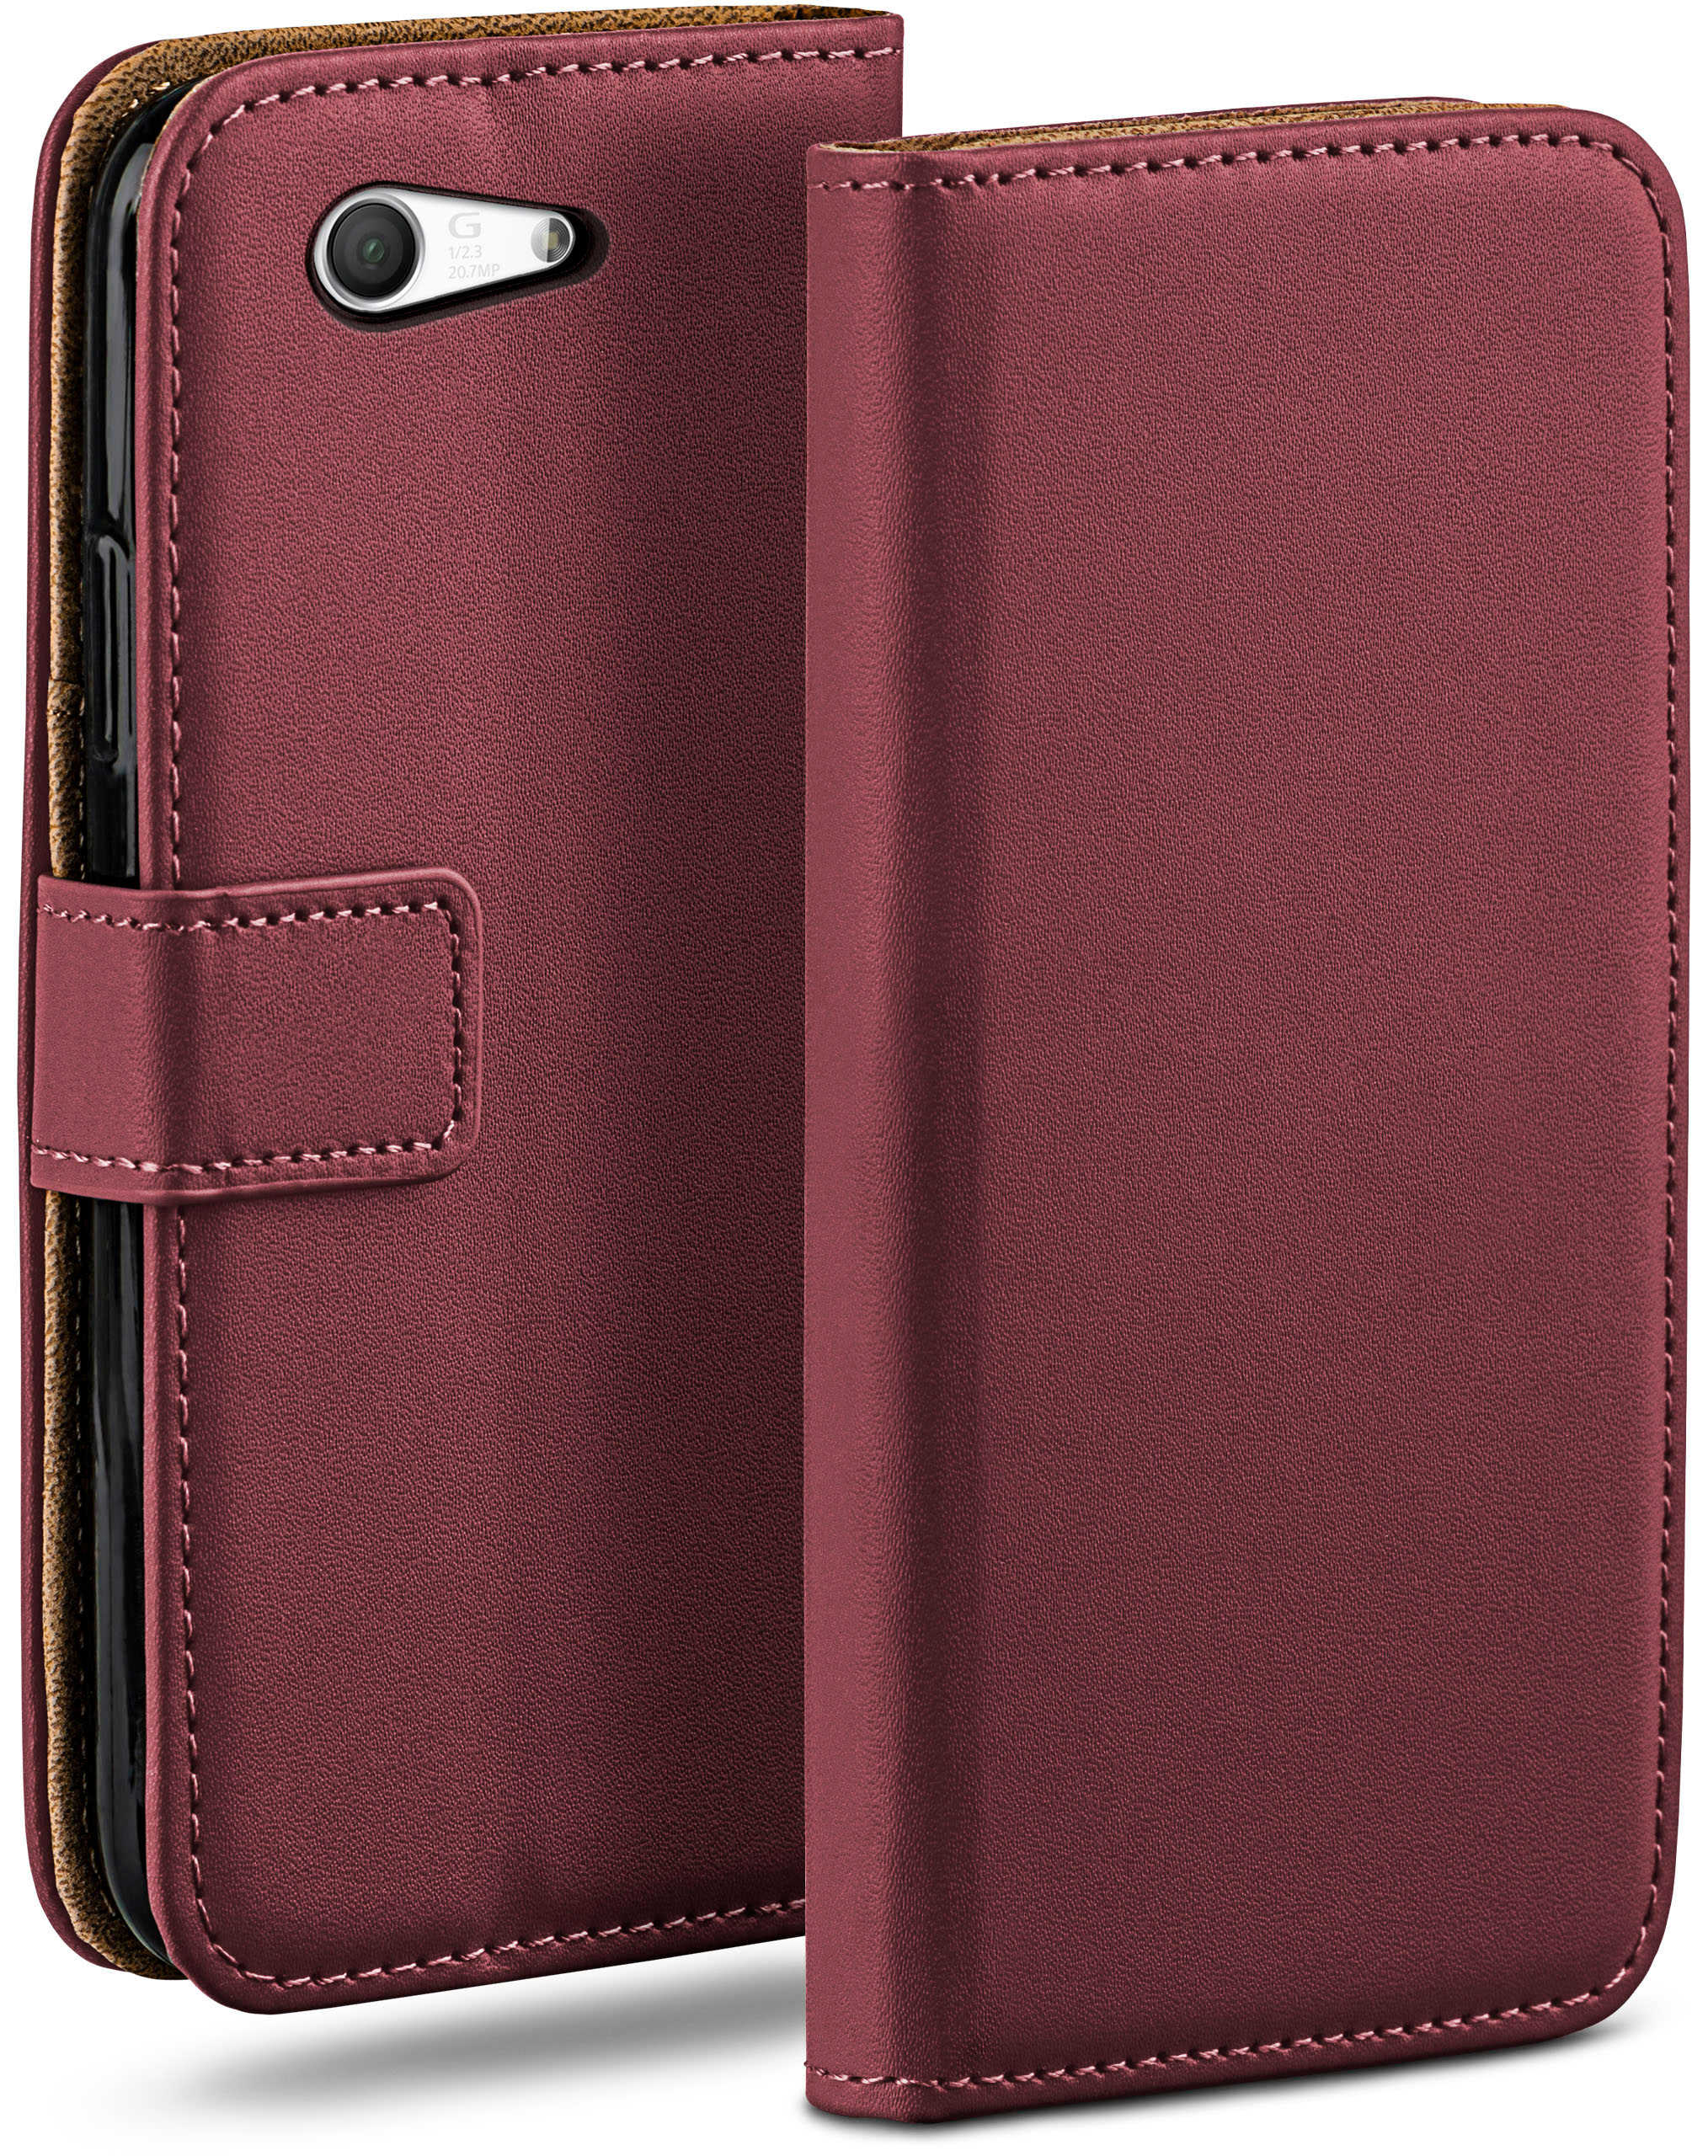 MOEX Book Case, Bookcover, Sony, Z3 Xperia Compact, Maroon-Red